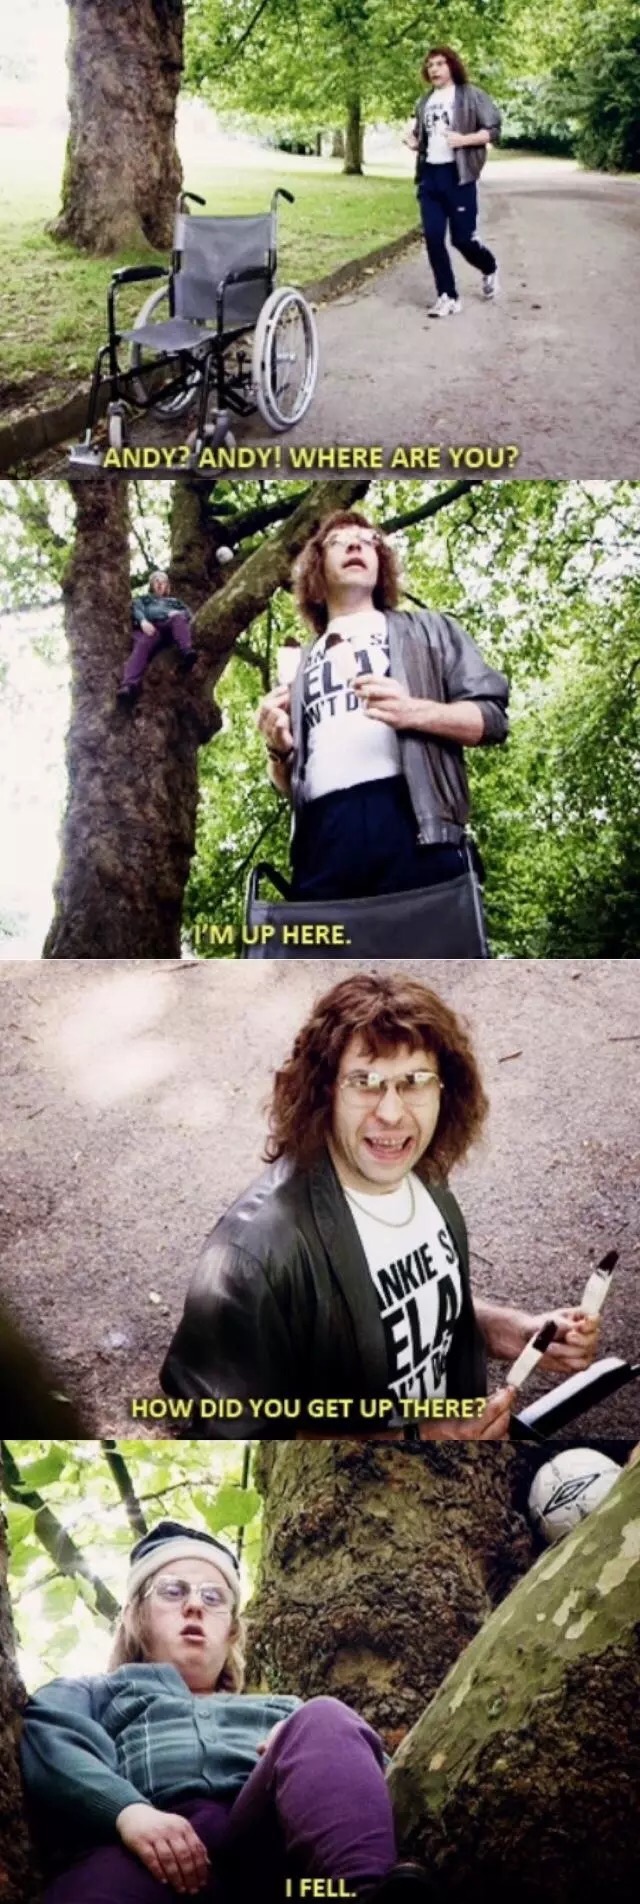 little britain memes - Sandyz'Andy! Where Are You? I'M Up Here. Nkie How Did You Get Up There? I Fell.